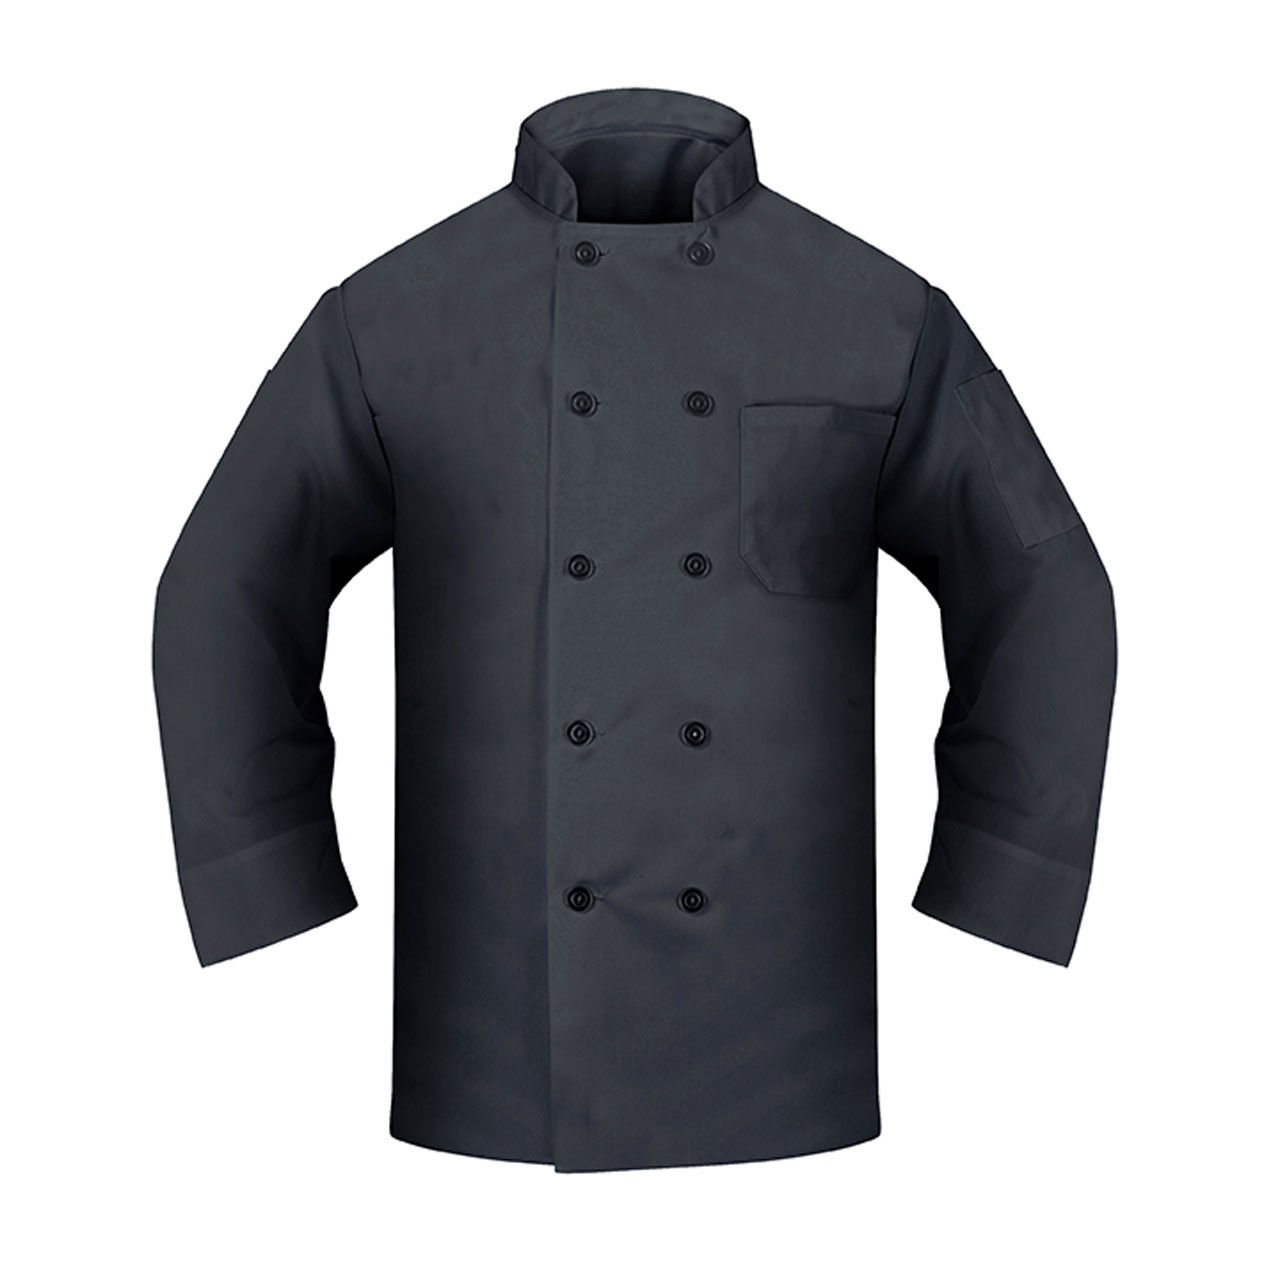 Does the black chef coat have a specific type of weave?